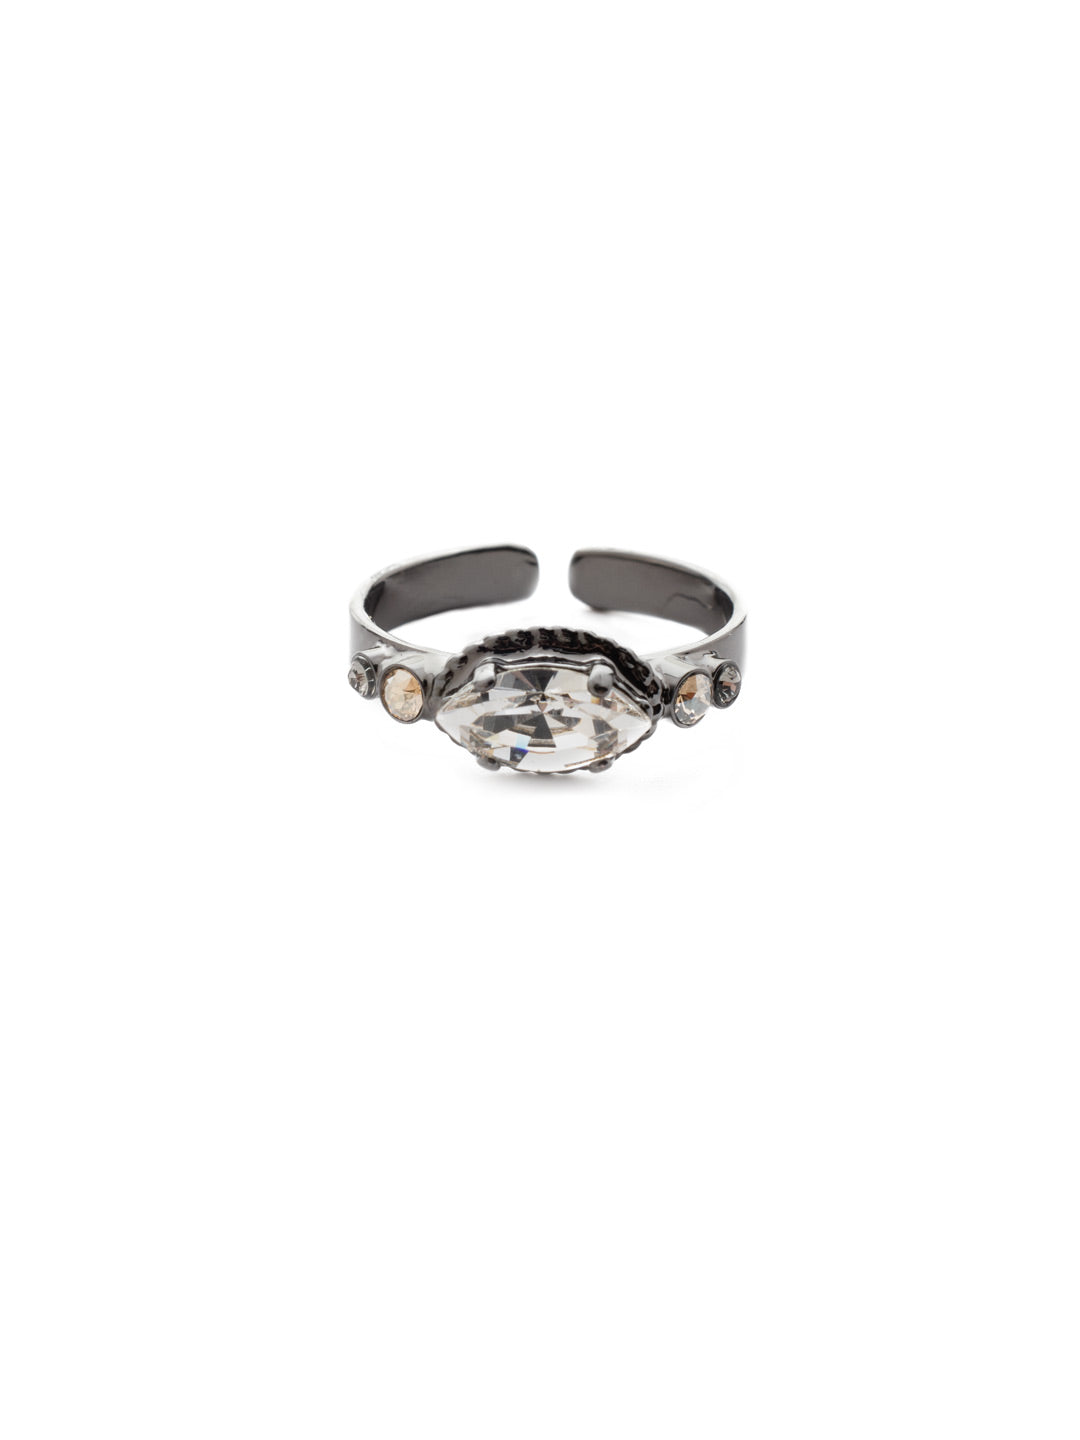 Emelia Band Ring - RES15GMGNS - The Emelia Band Ring can be adjusted to size. Wear it to add a bit of fun sparkle to your life with the center sparkling navette crystal. From Sorrelli's Golden Shadow collection in our Gun Metal finish.